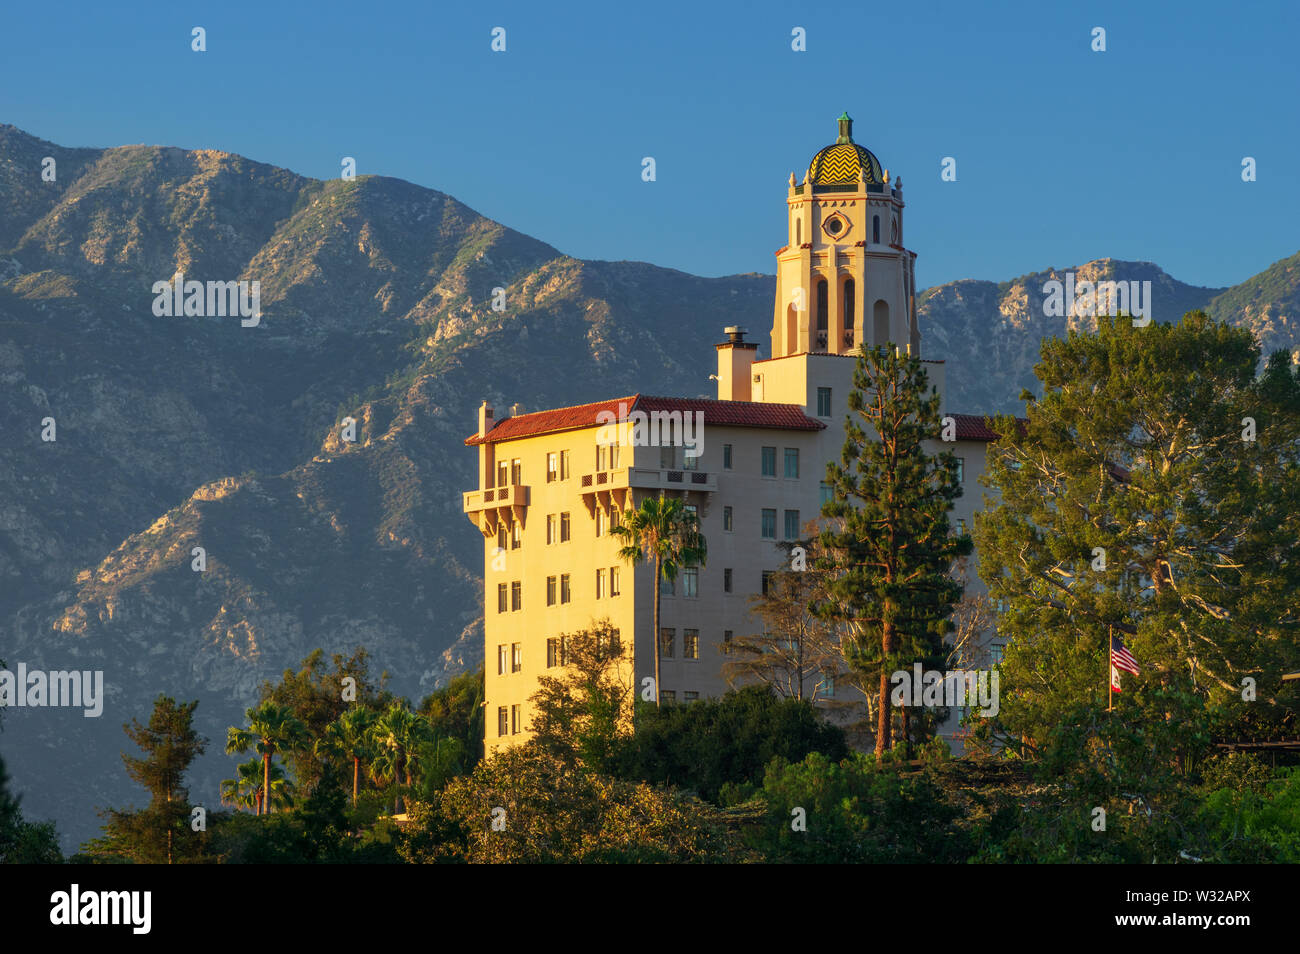 Image of the Richard H. Chambers Courthouse in Pasadena, California, with the San Gabriel Mountains in the background. Stock Photo